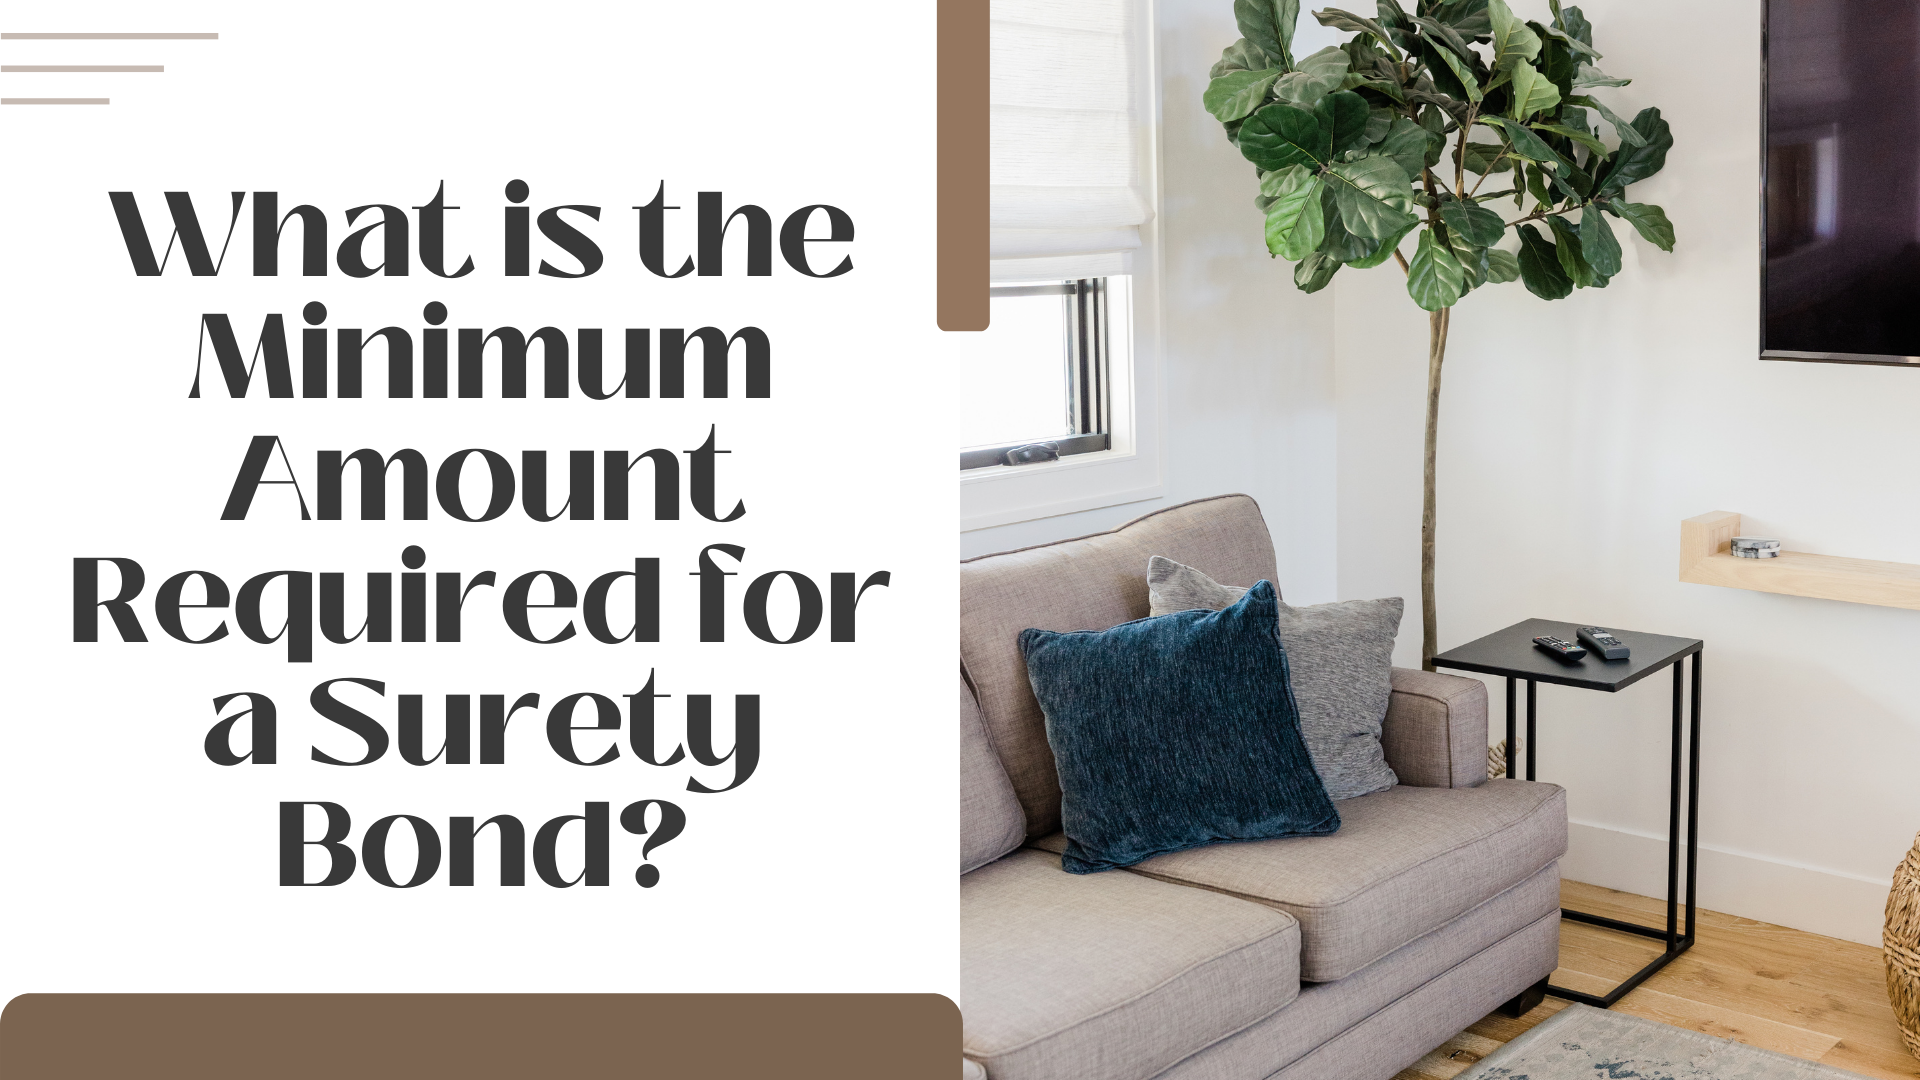 surety bond - What is the bare minimum for obtaining a surety bond - receiving area